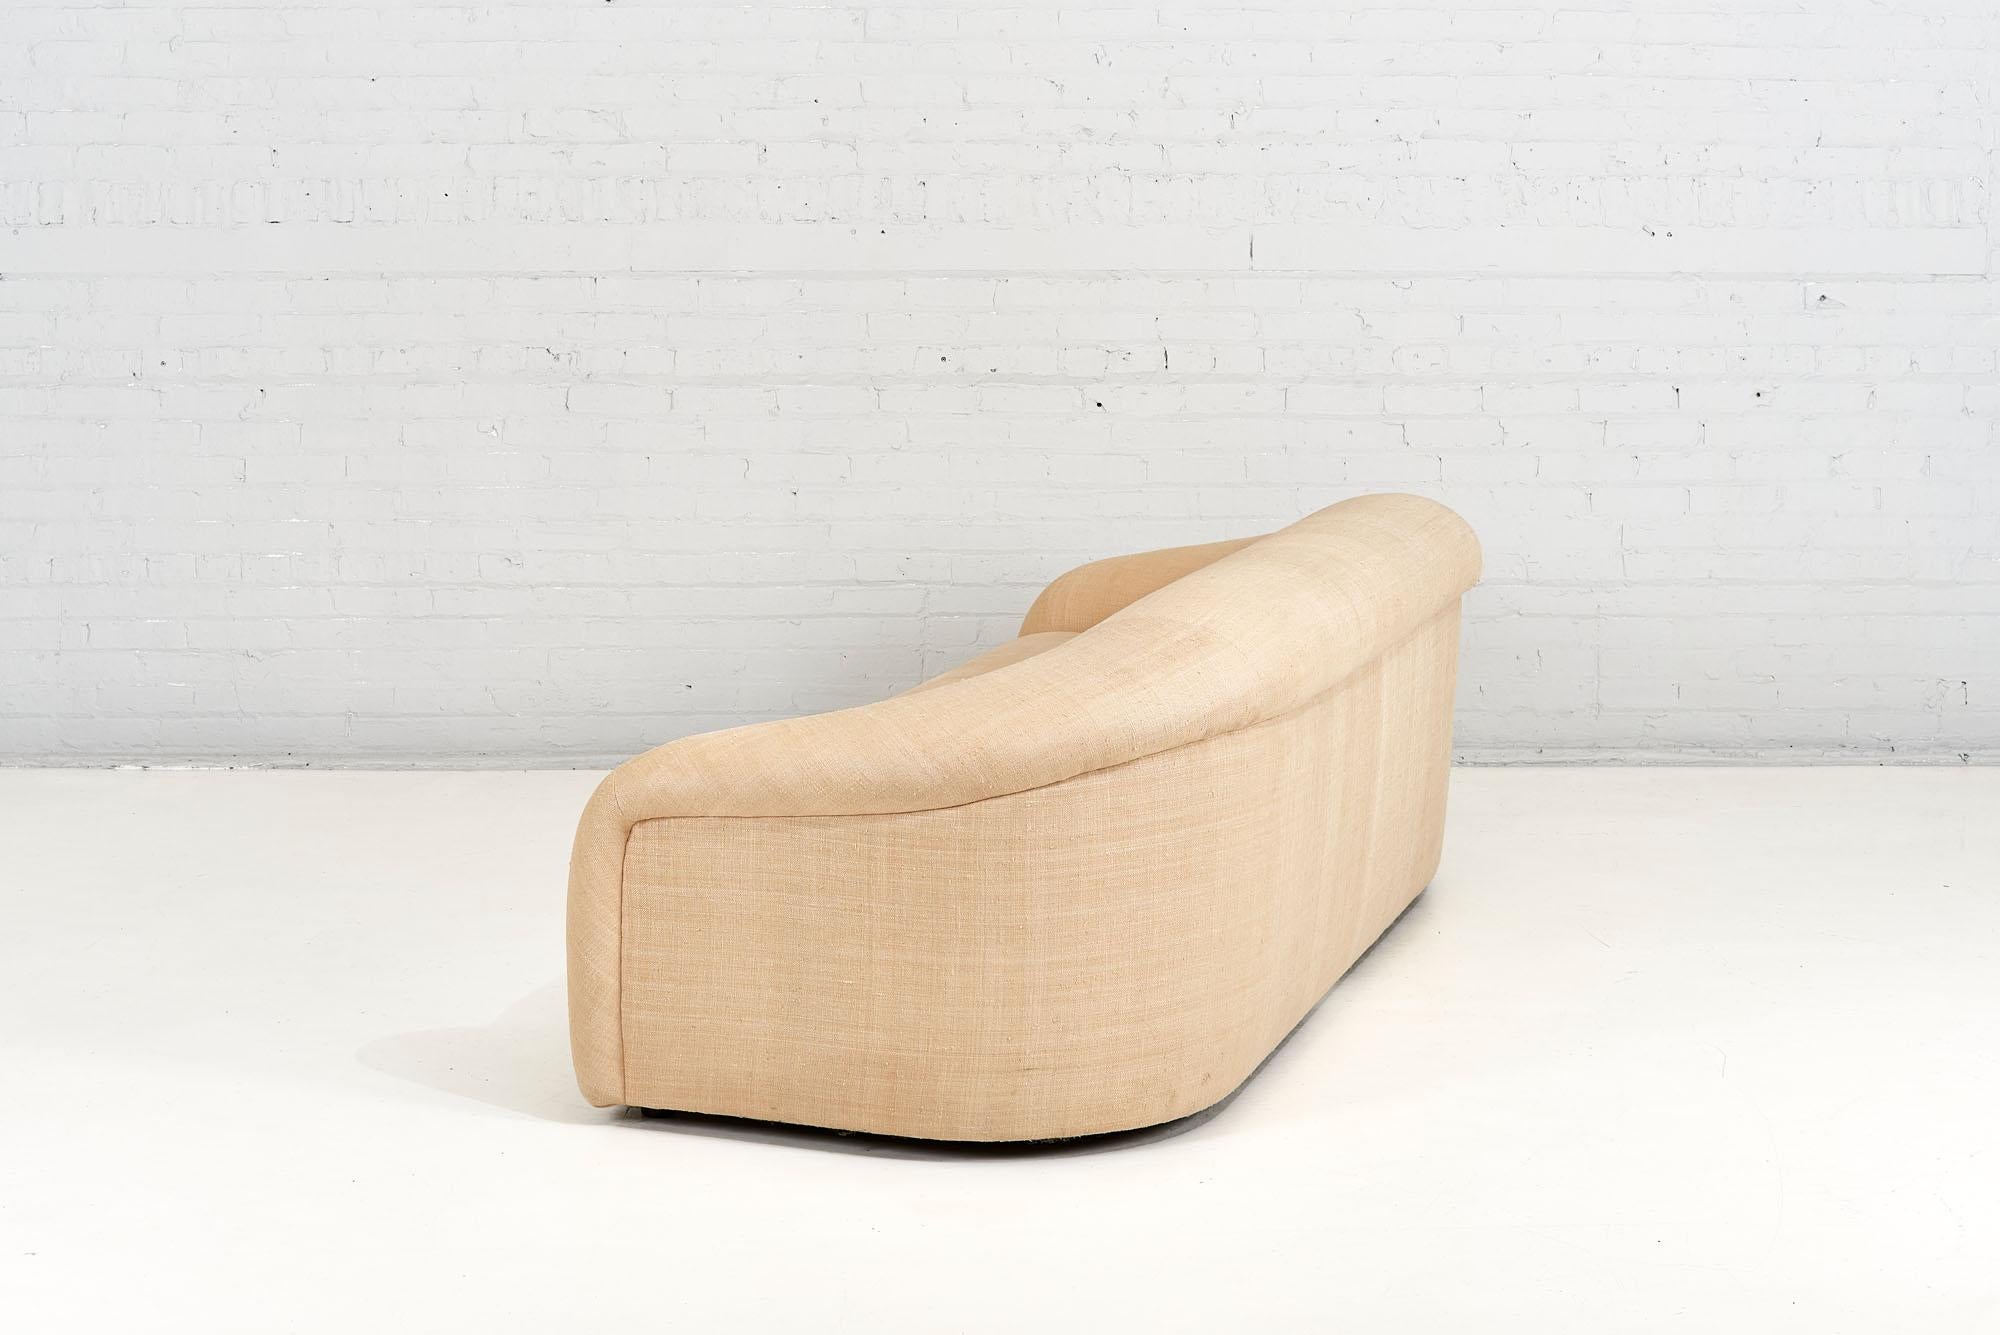 Late 20th Century Organic Form Sofa by Preview, ca 1991